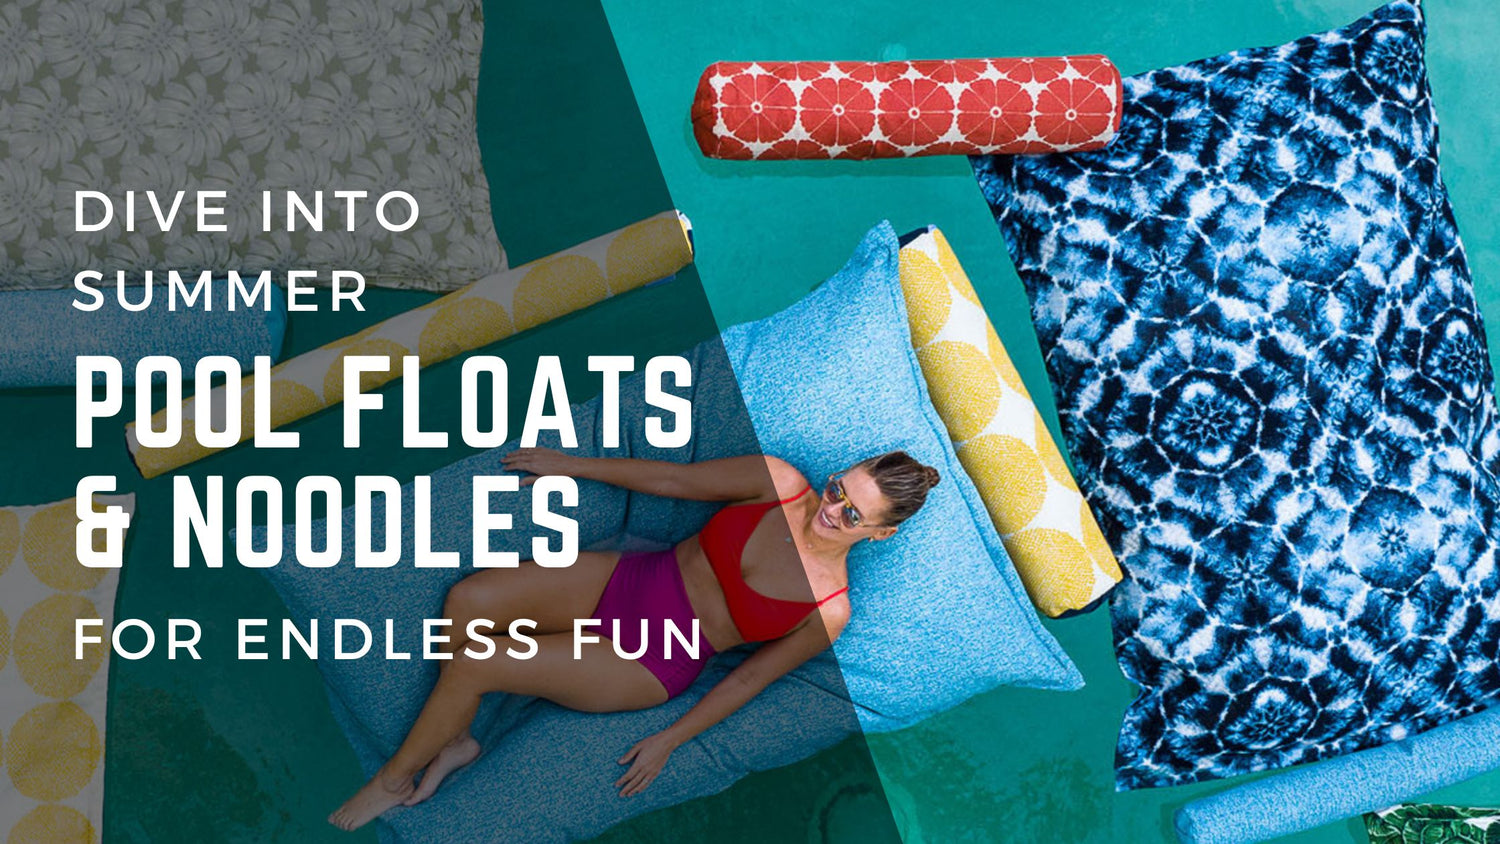 Dive into Summer: Pool Floats and Noodles for Endless Fun